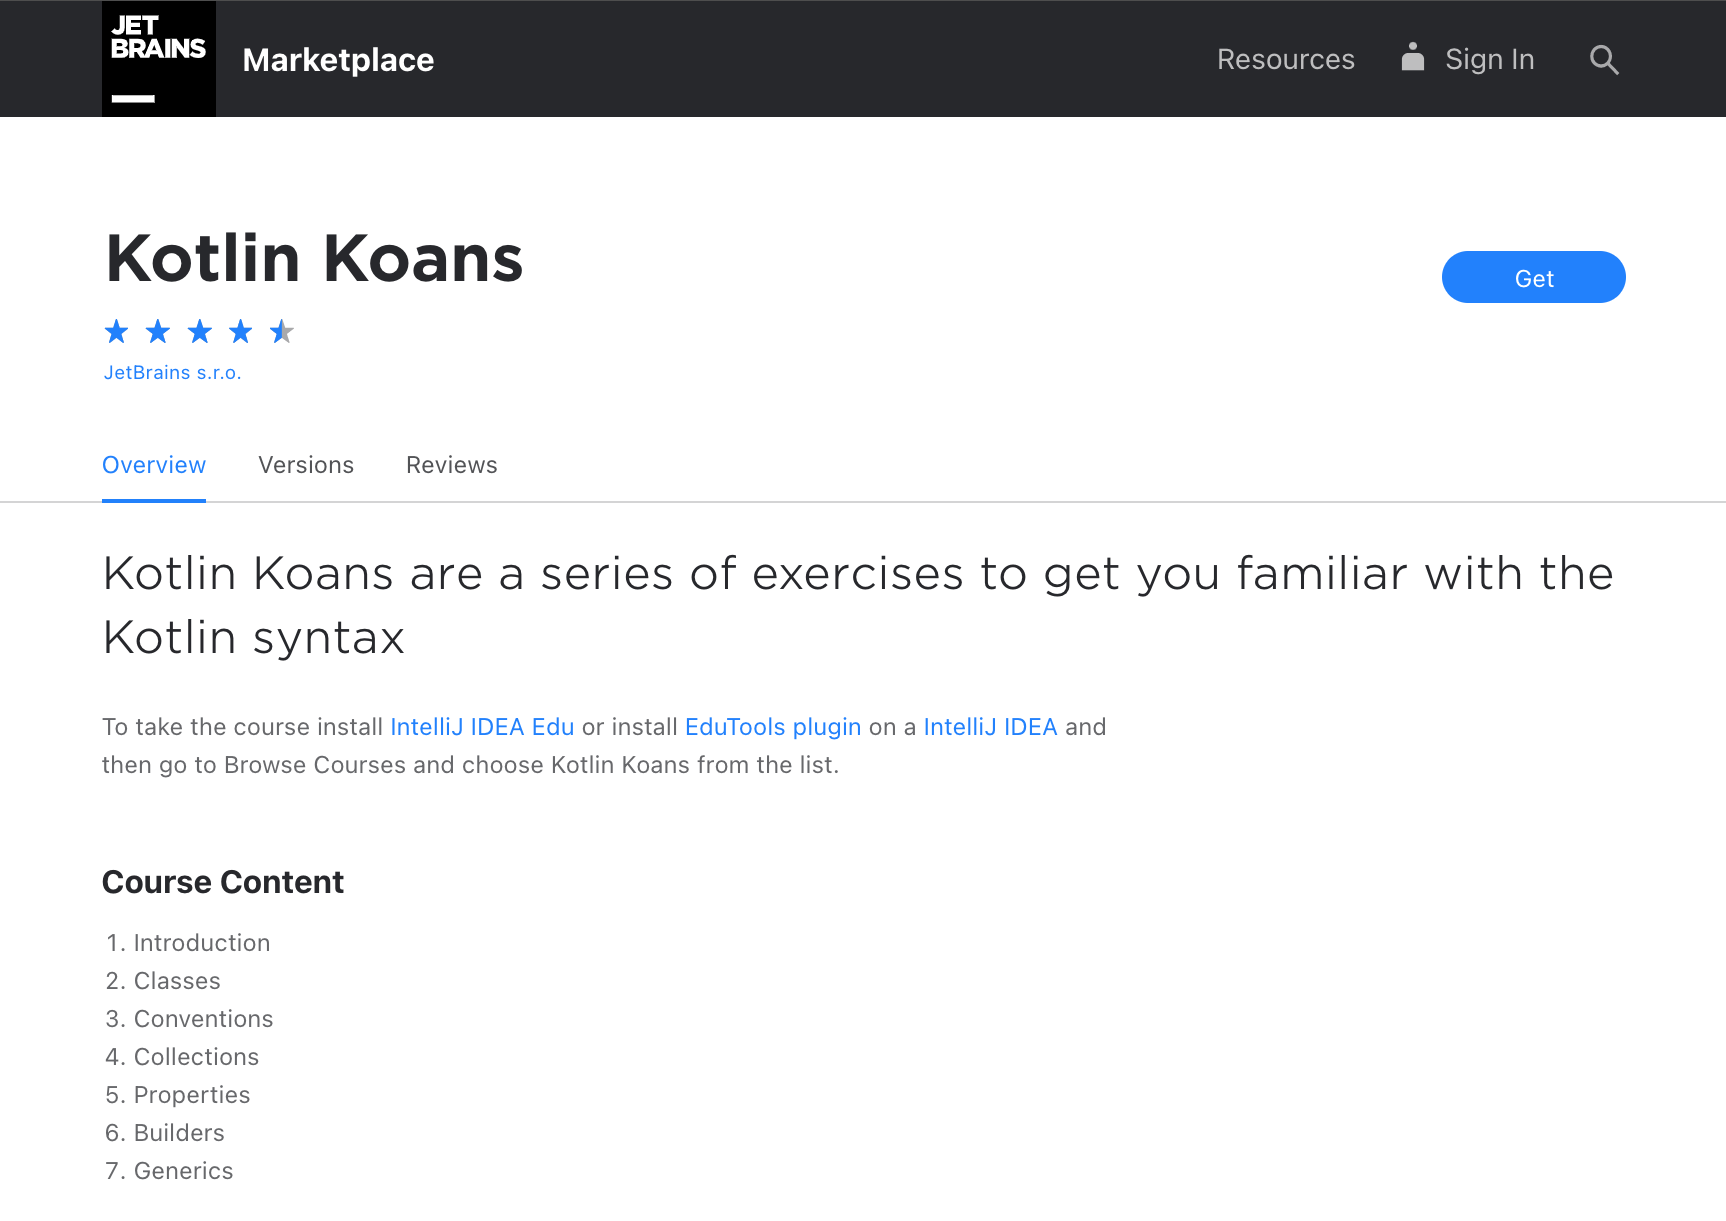 The Kotlin Koans course page on the Marketplace